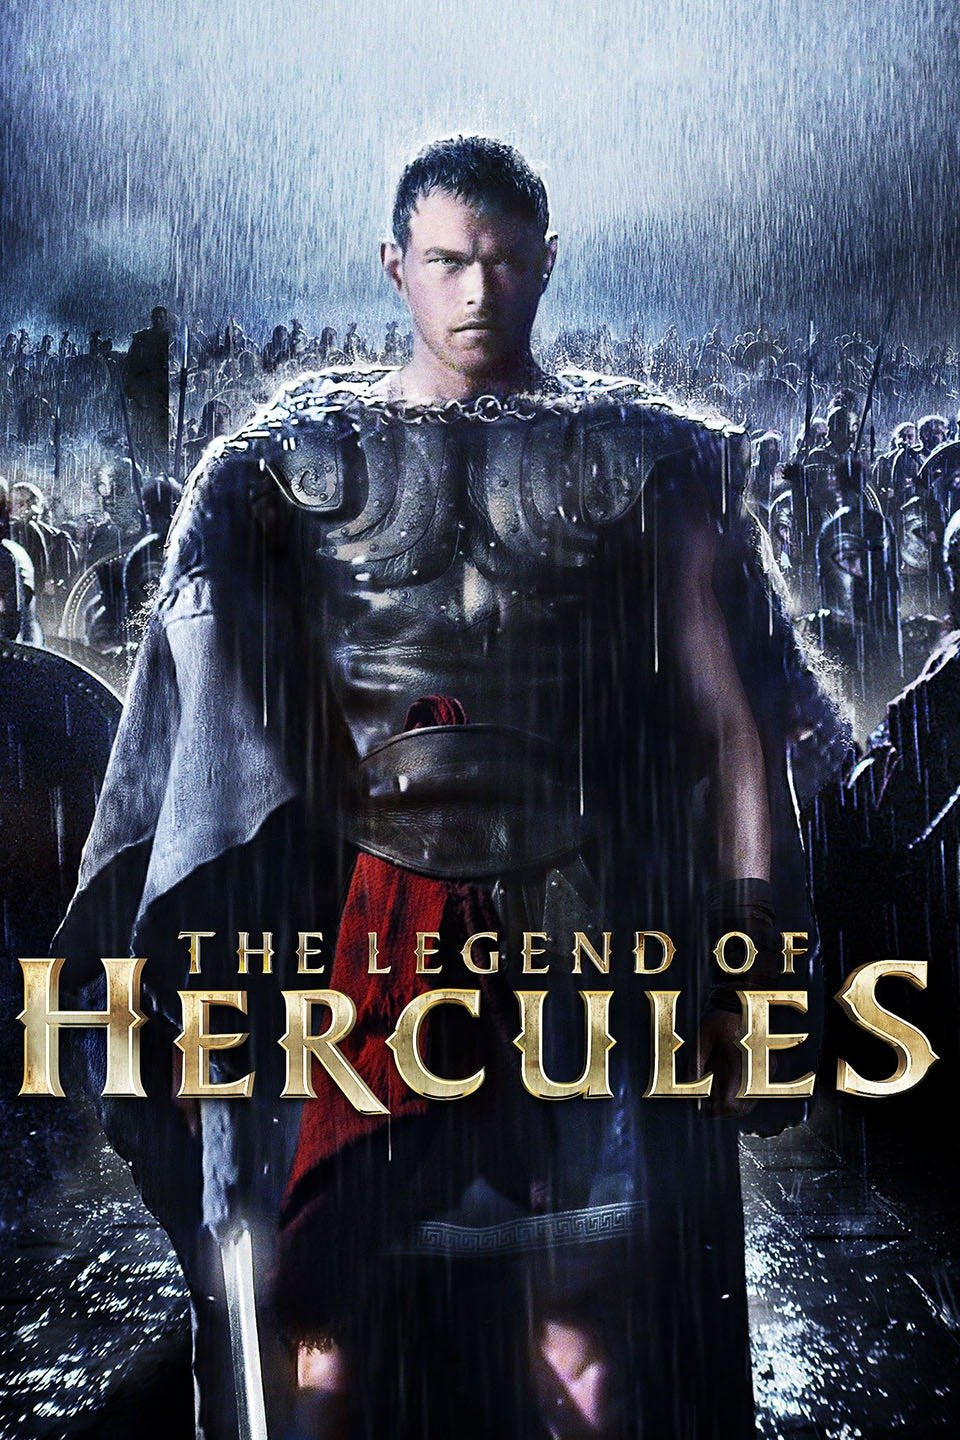 The Legend of Hercules (2014) iTunes HD redemption only